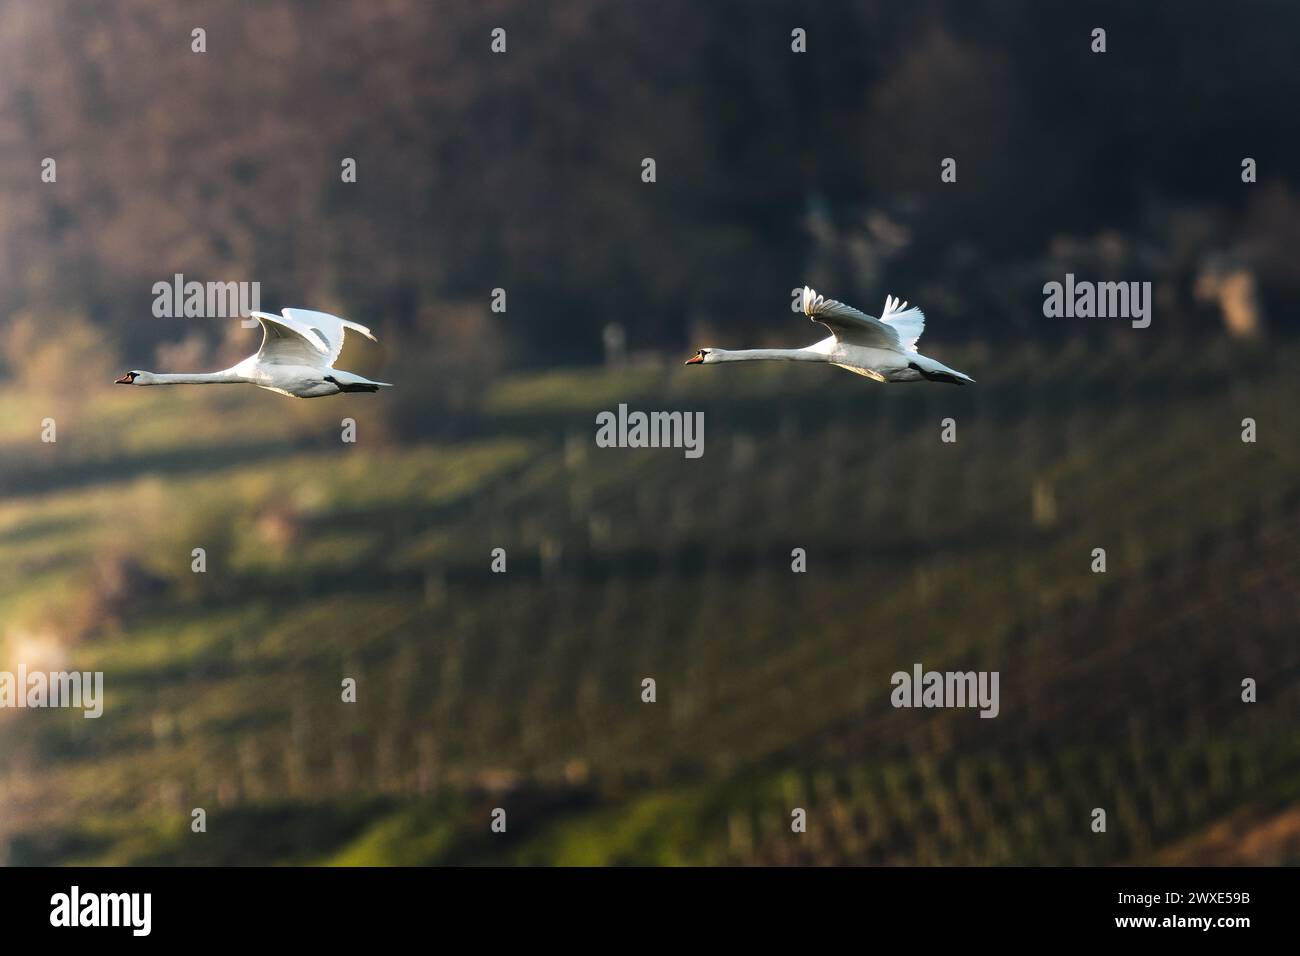 The two mute swans soaring in front of a green hillside Stock Photo